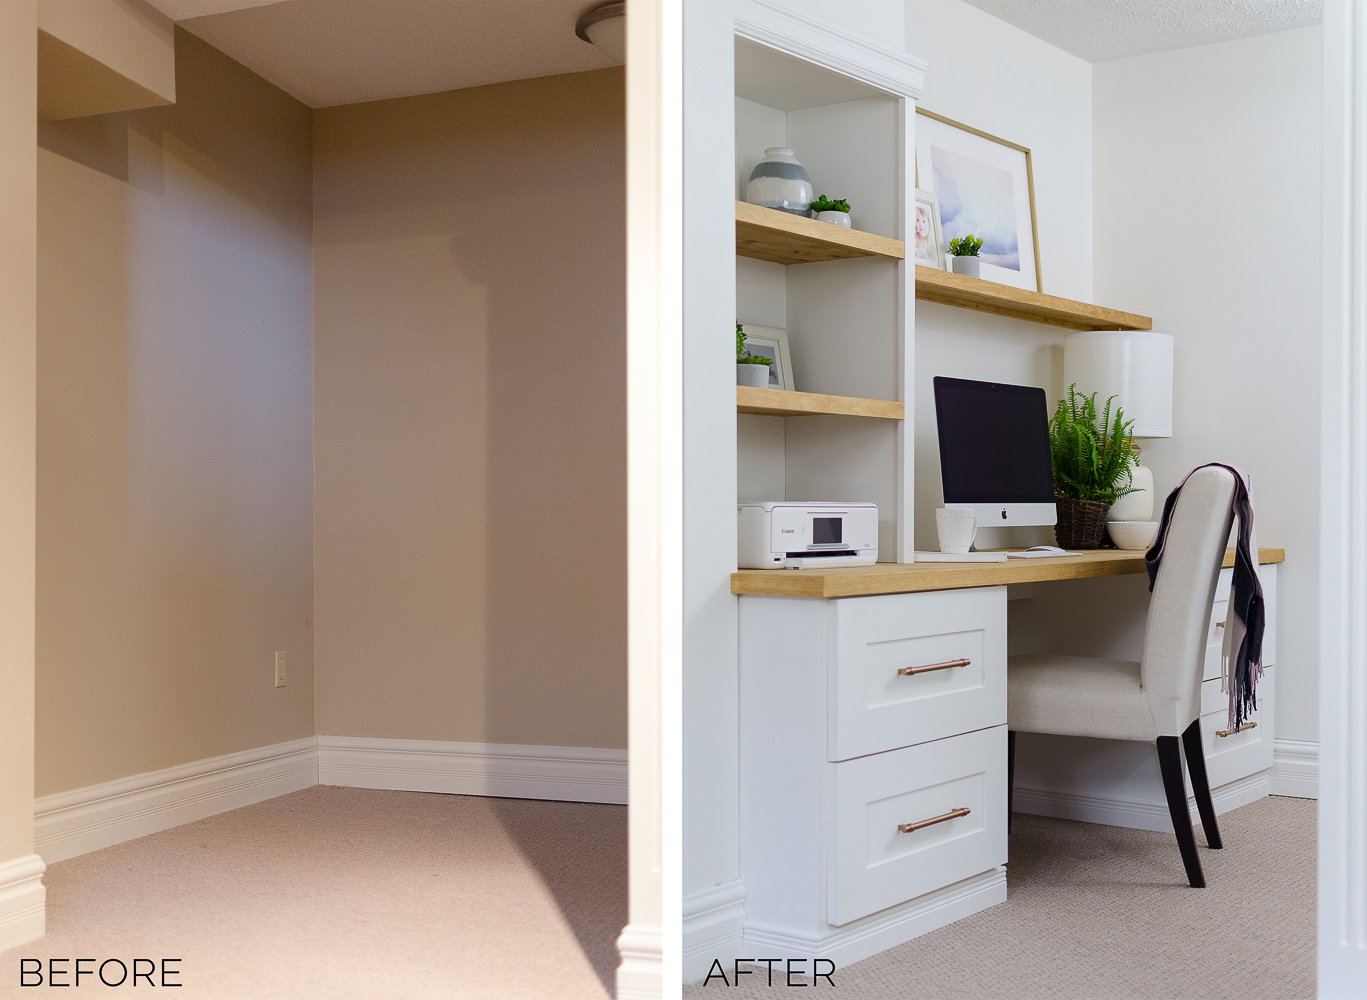 A DIY built-in office nook provides the perfect space for a home office or homework zone.